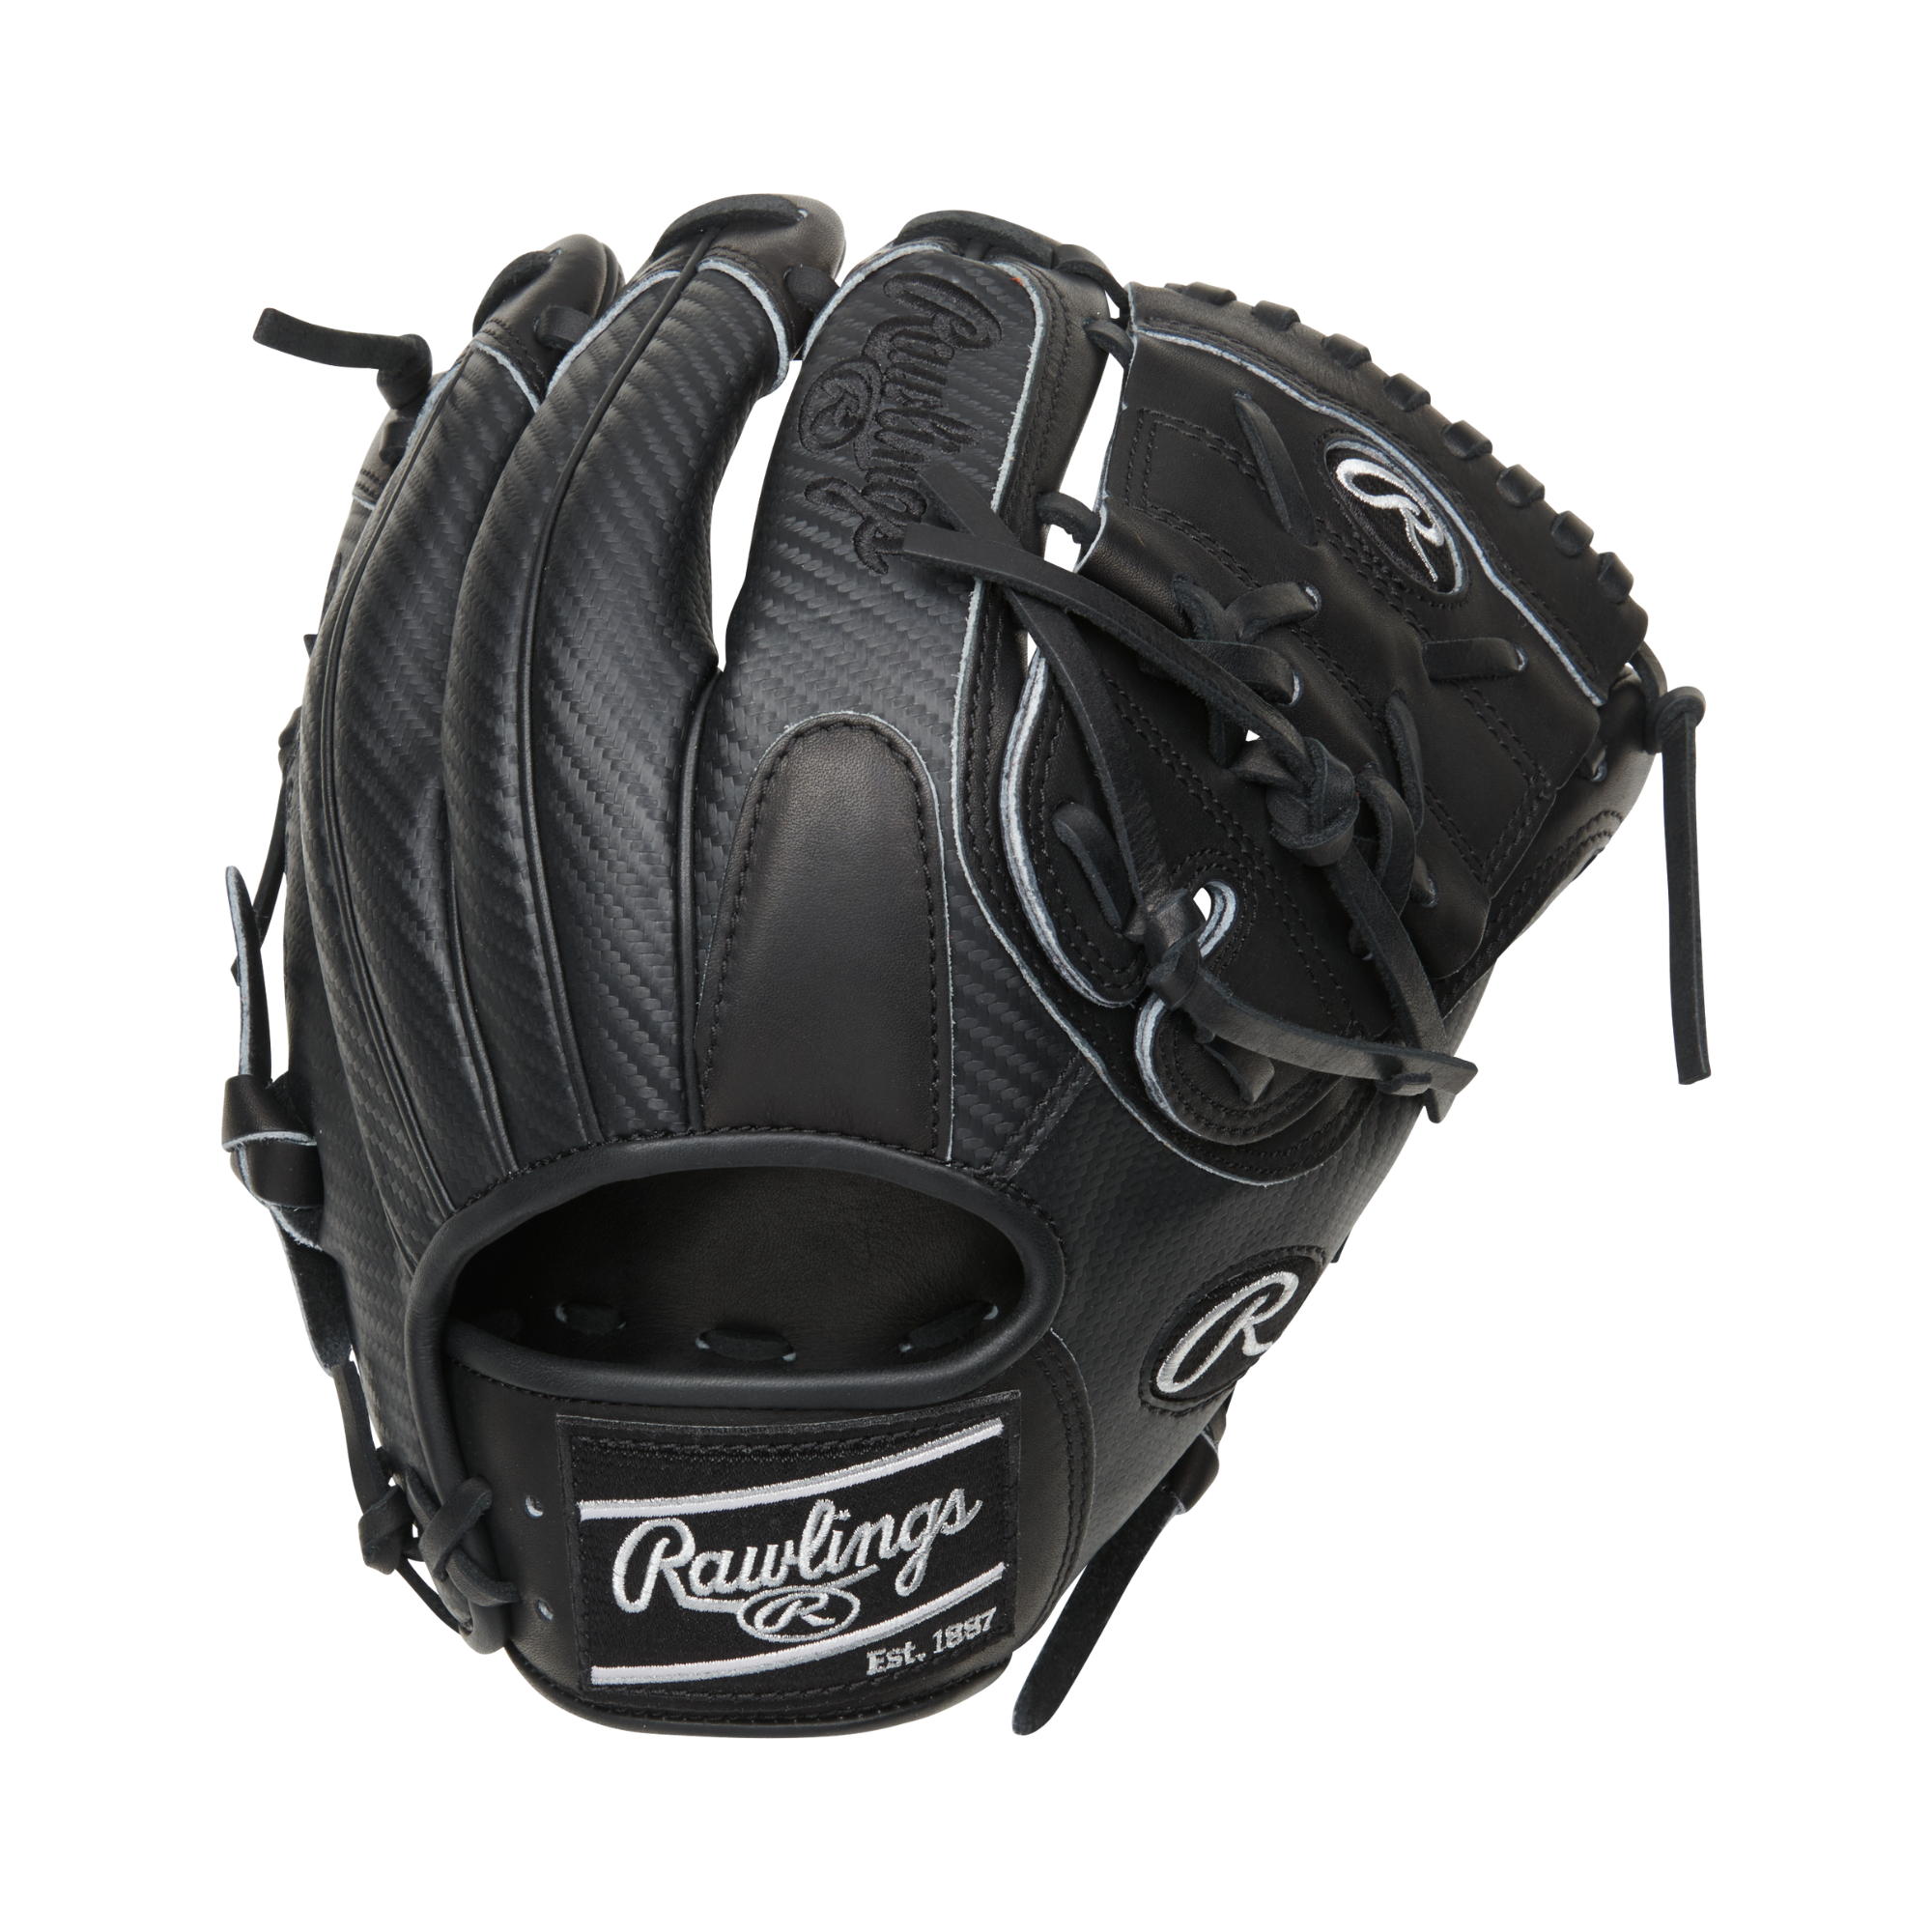 Rawlings Heart of the Hide Hyper Shell Infield/Pitcher's Glove RHT 11.75"